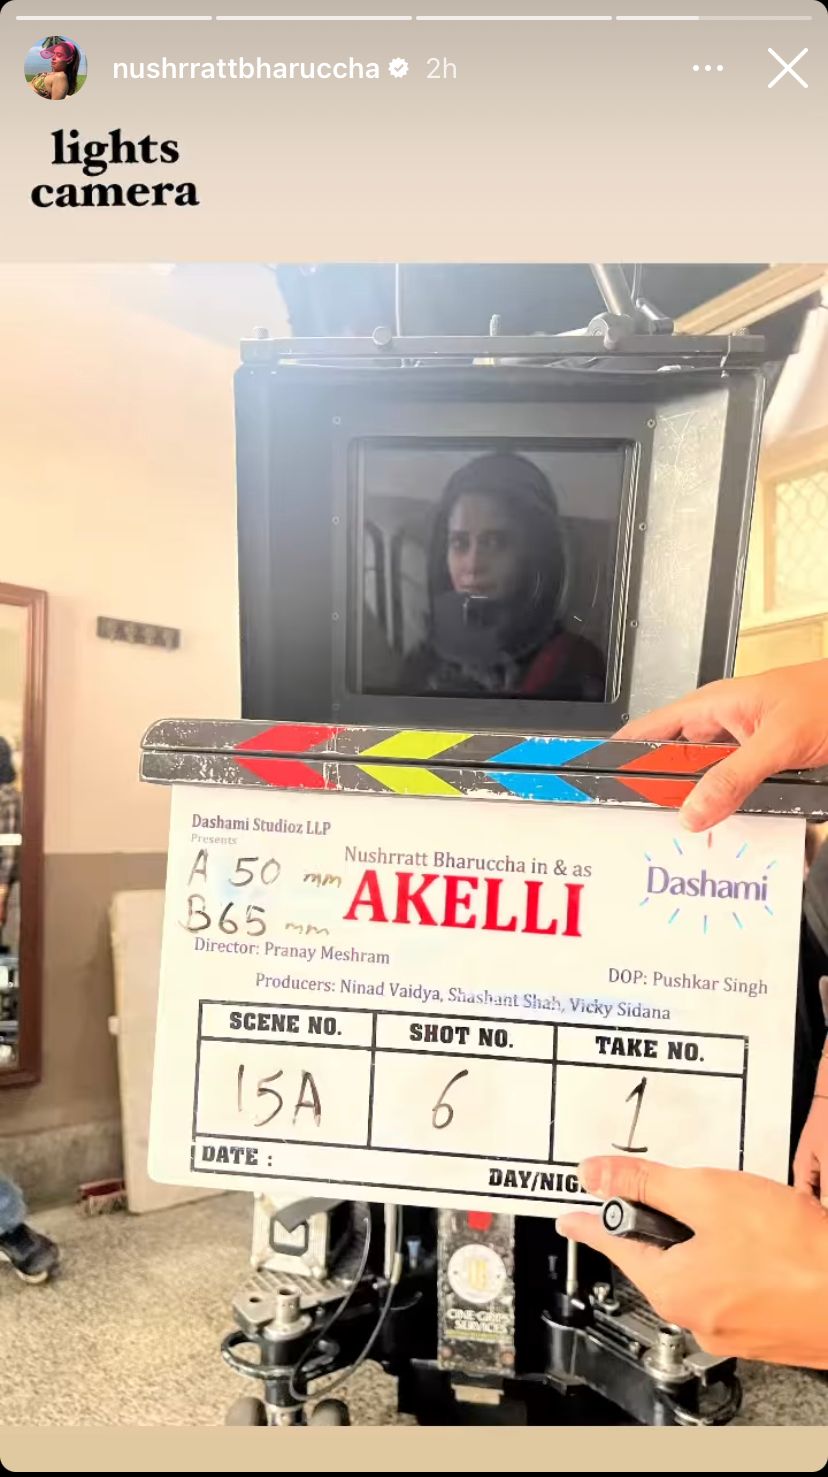 Nushrratt Bharuccha Shares A Glimpse From The Sets Of Her Upcoming Project 'Akelli